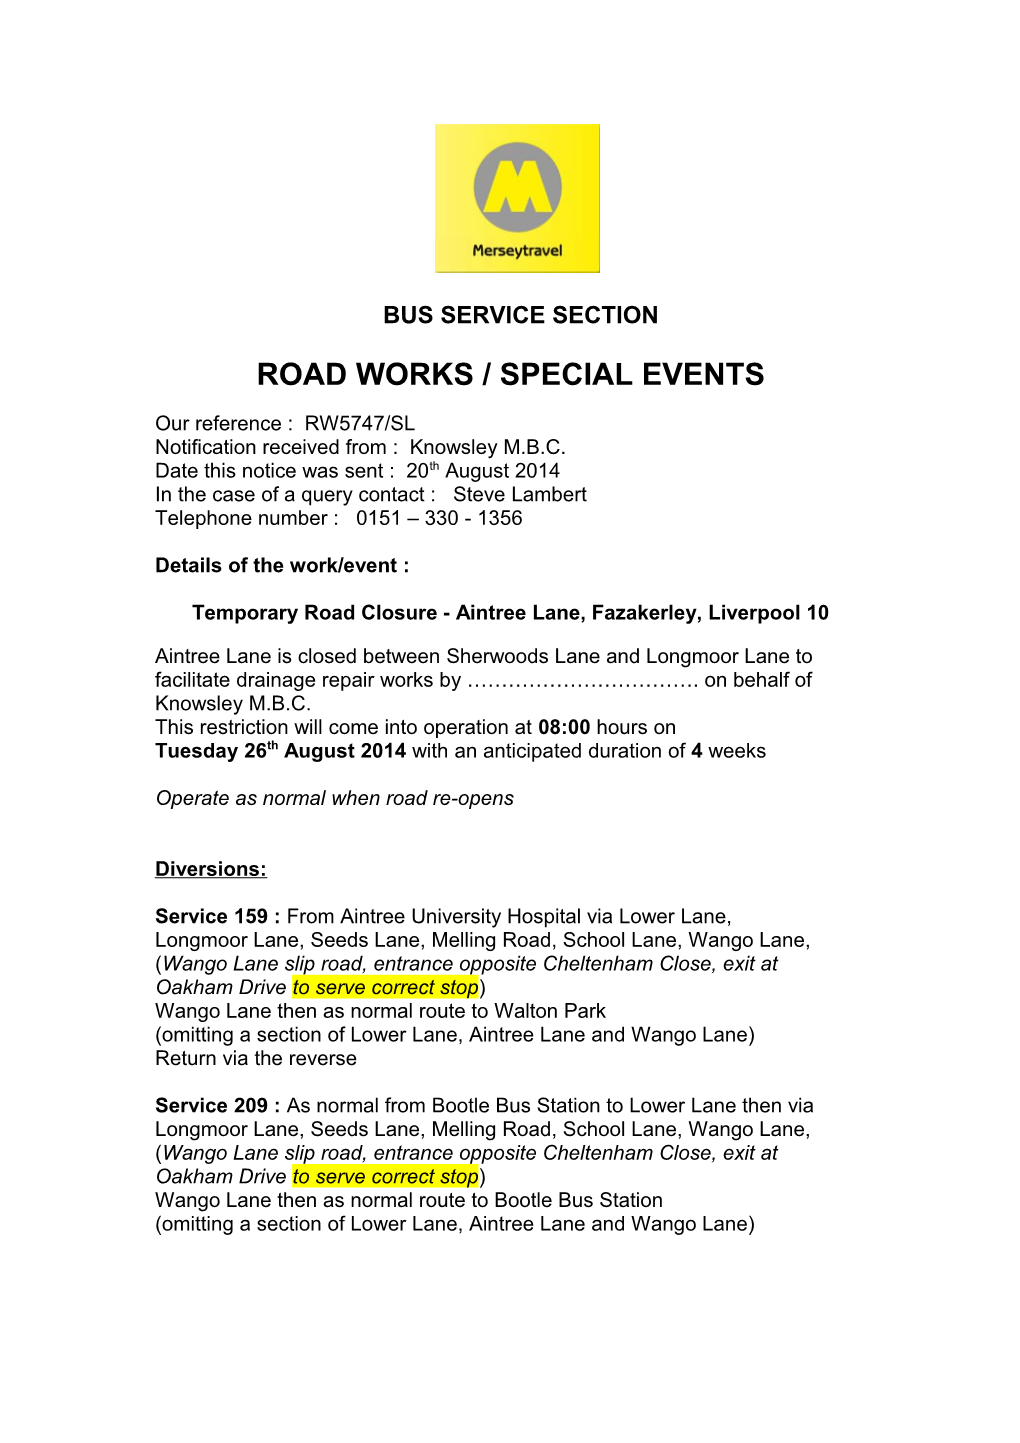 Road Works / Special Events